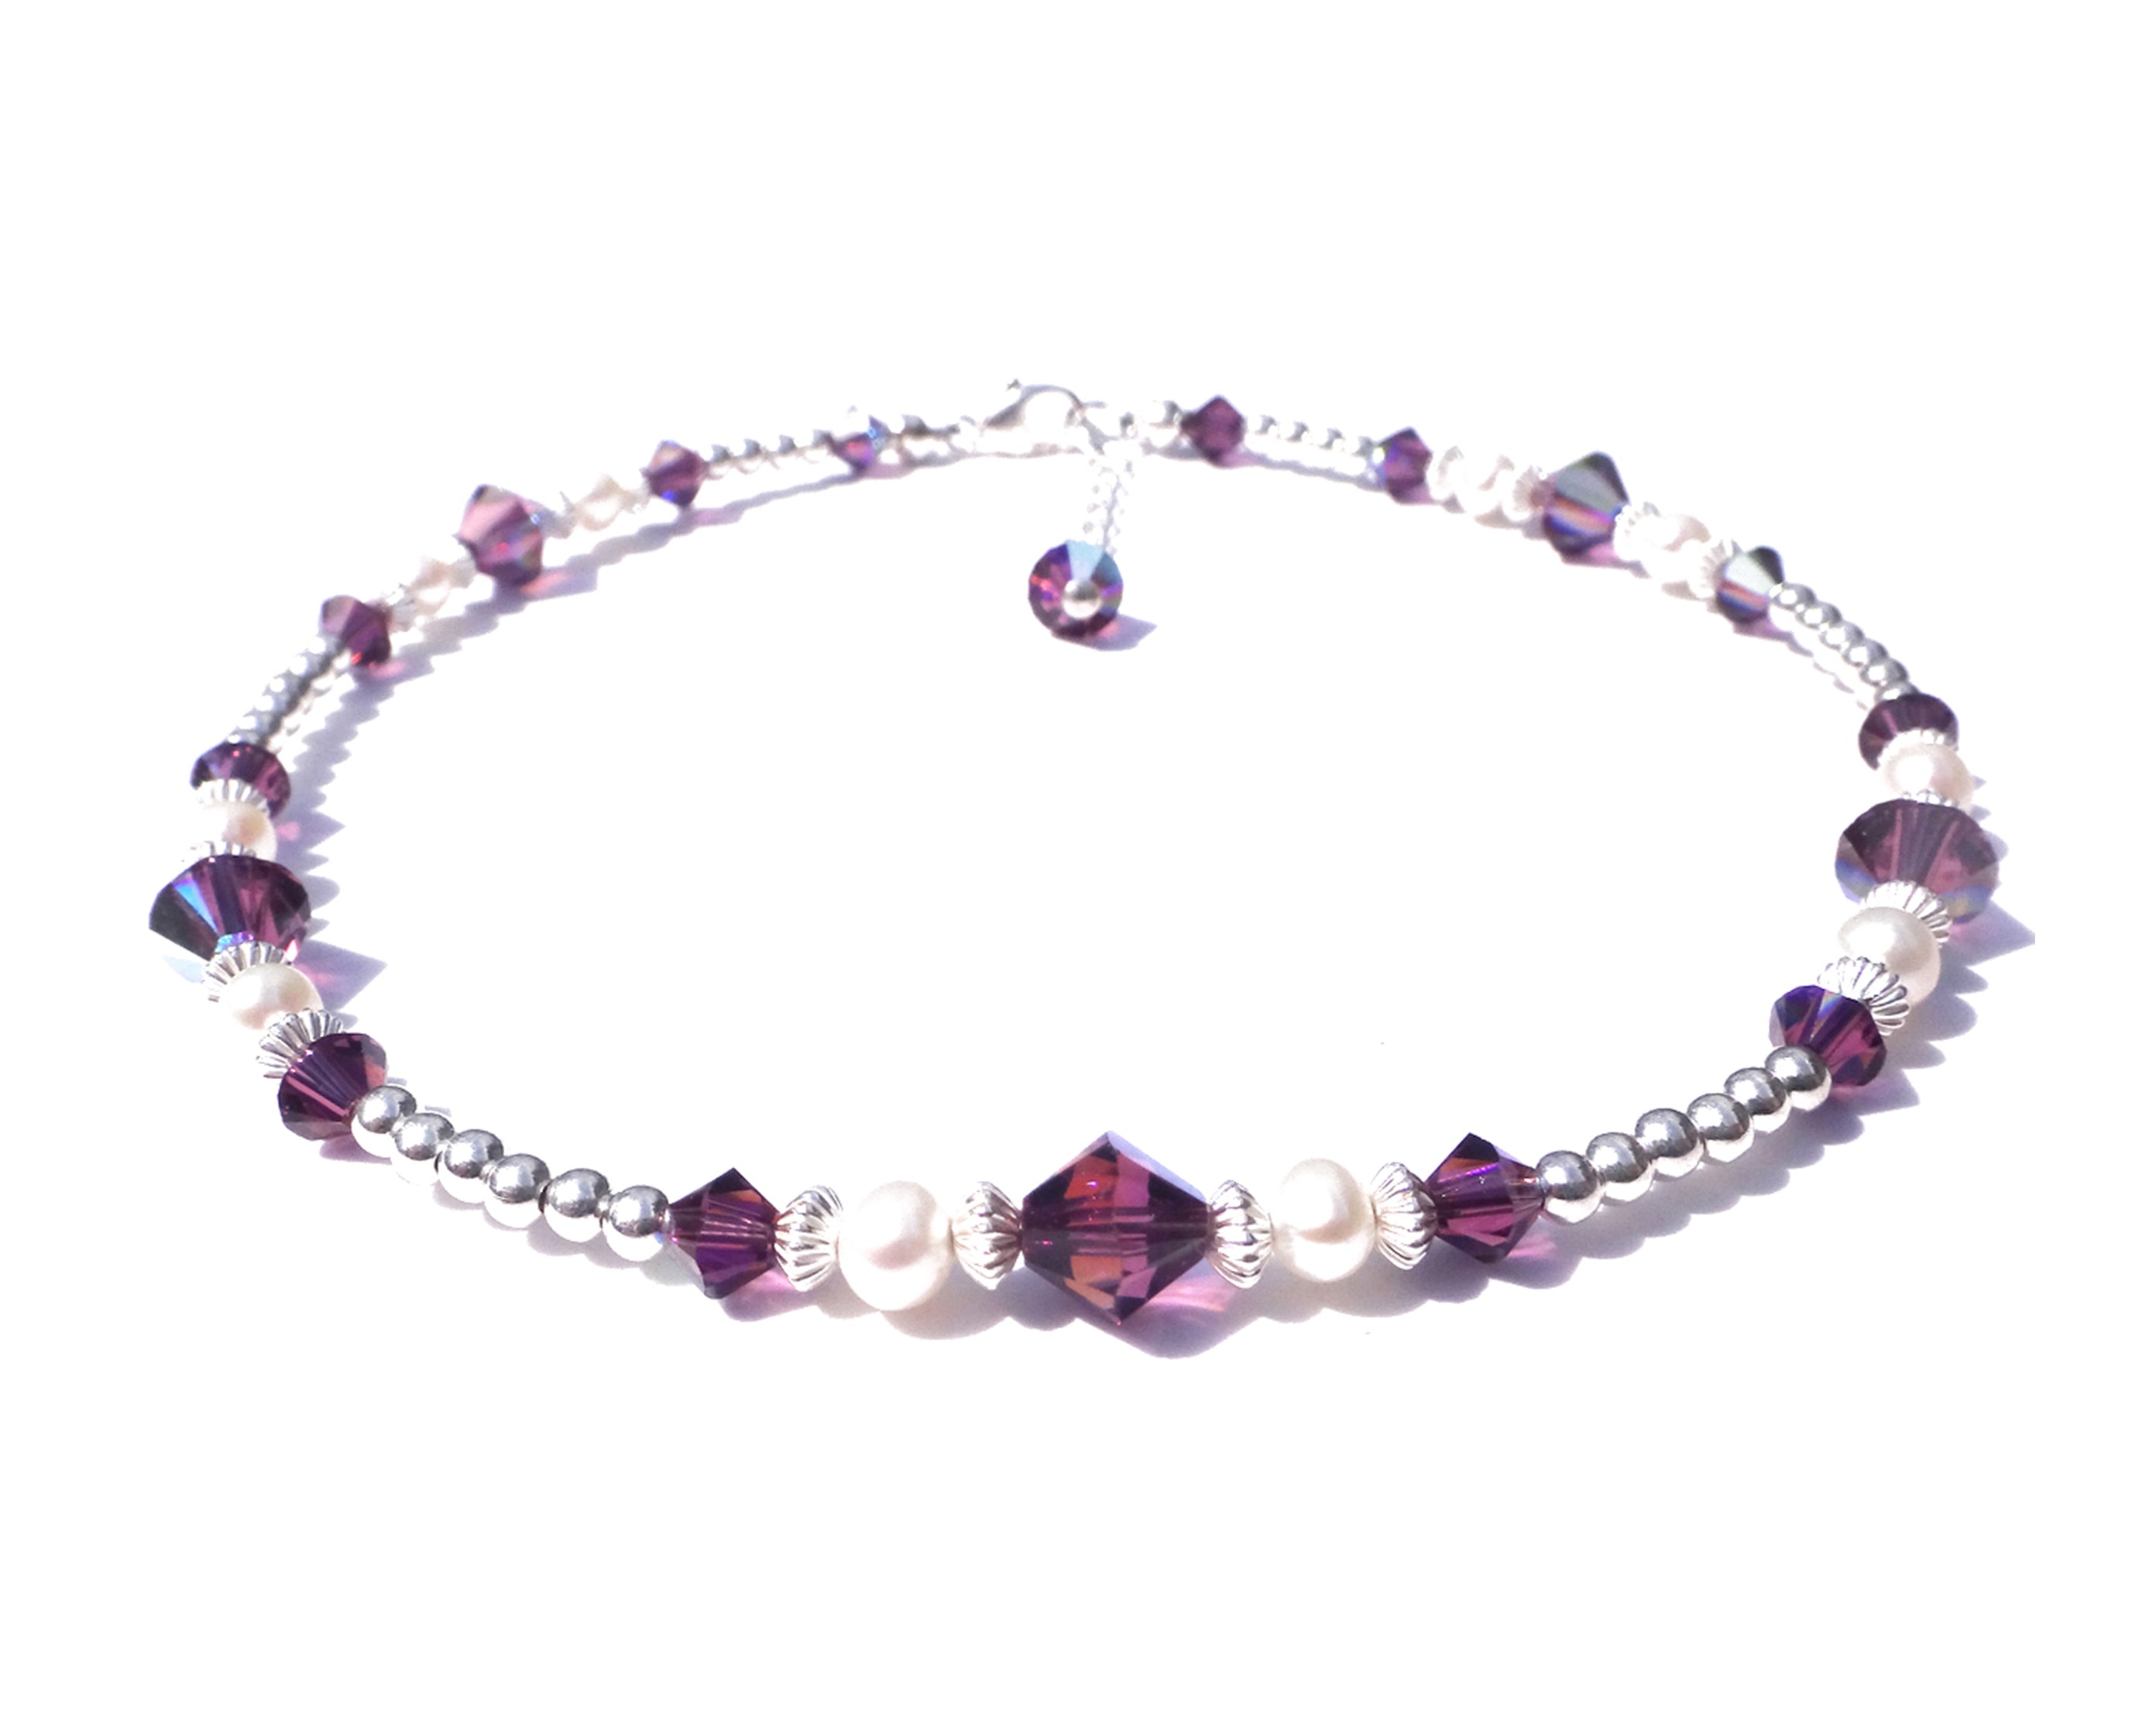 Sterling Silver Birthstone Anklets with Austrian Crystals and Freshwater Pearls, in Sizes Small to Plus Size. 